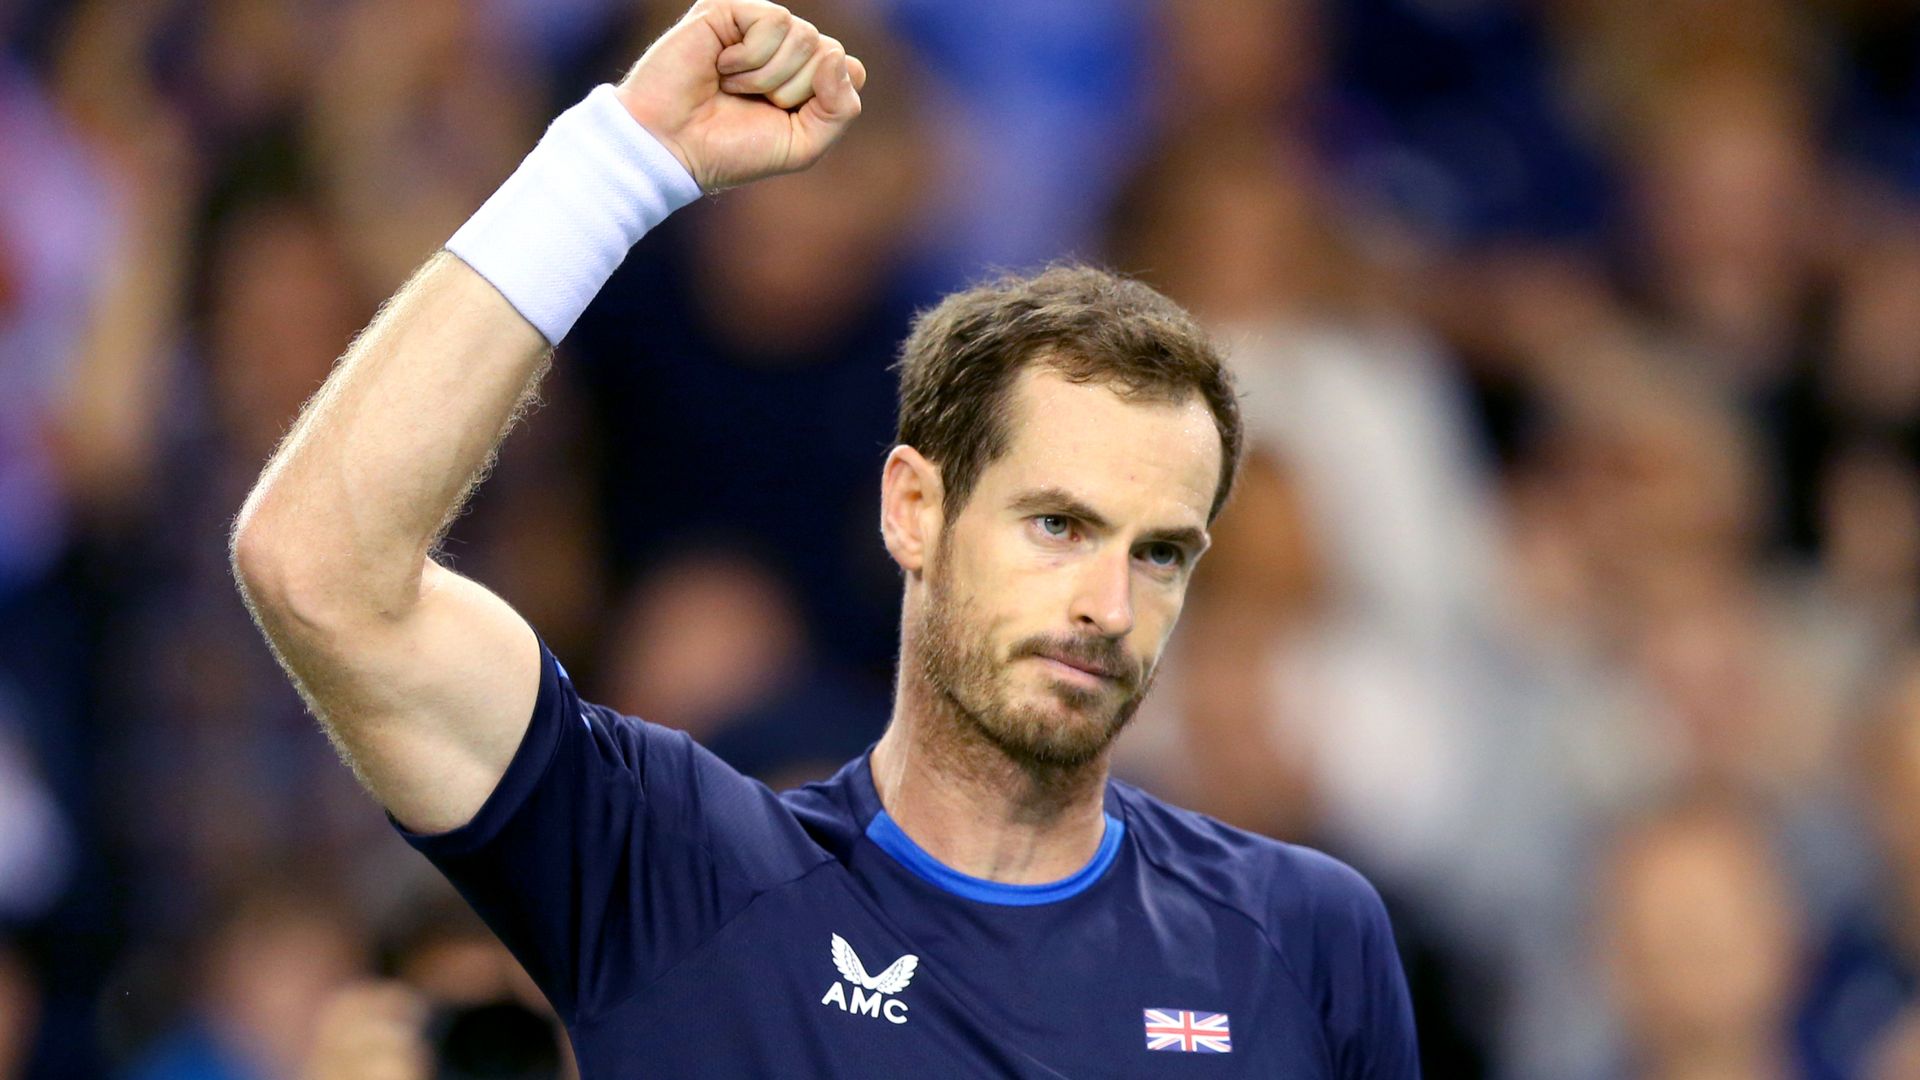 Murray recalled to Great Britain Davis Cup squad